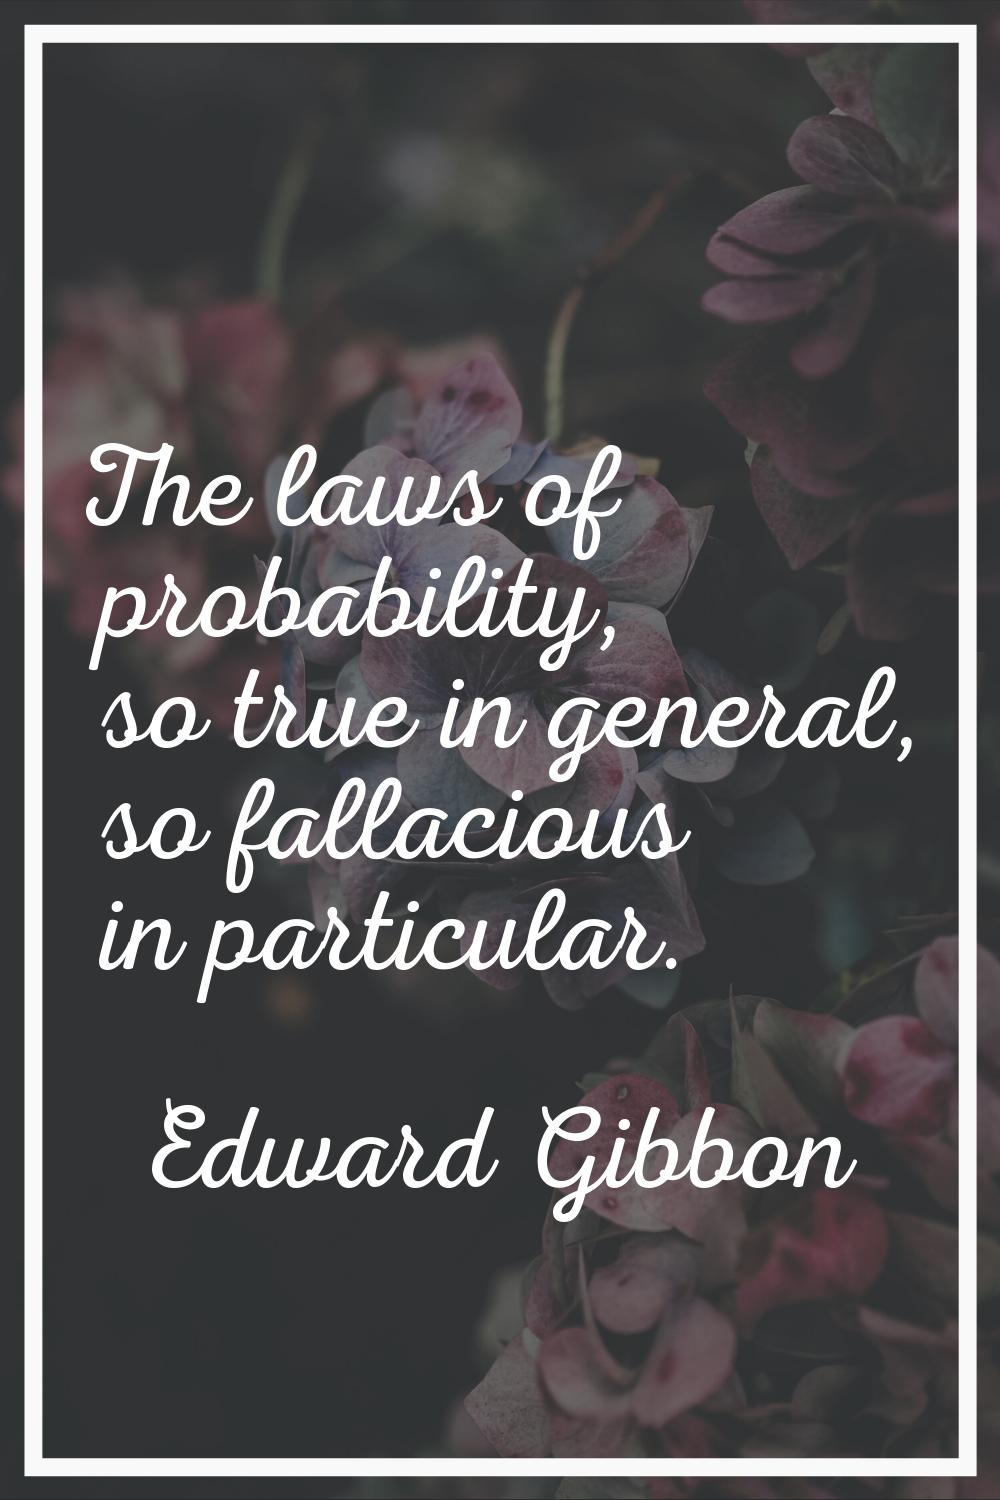 The laws of probability, so true in general, so fallacious in particular.